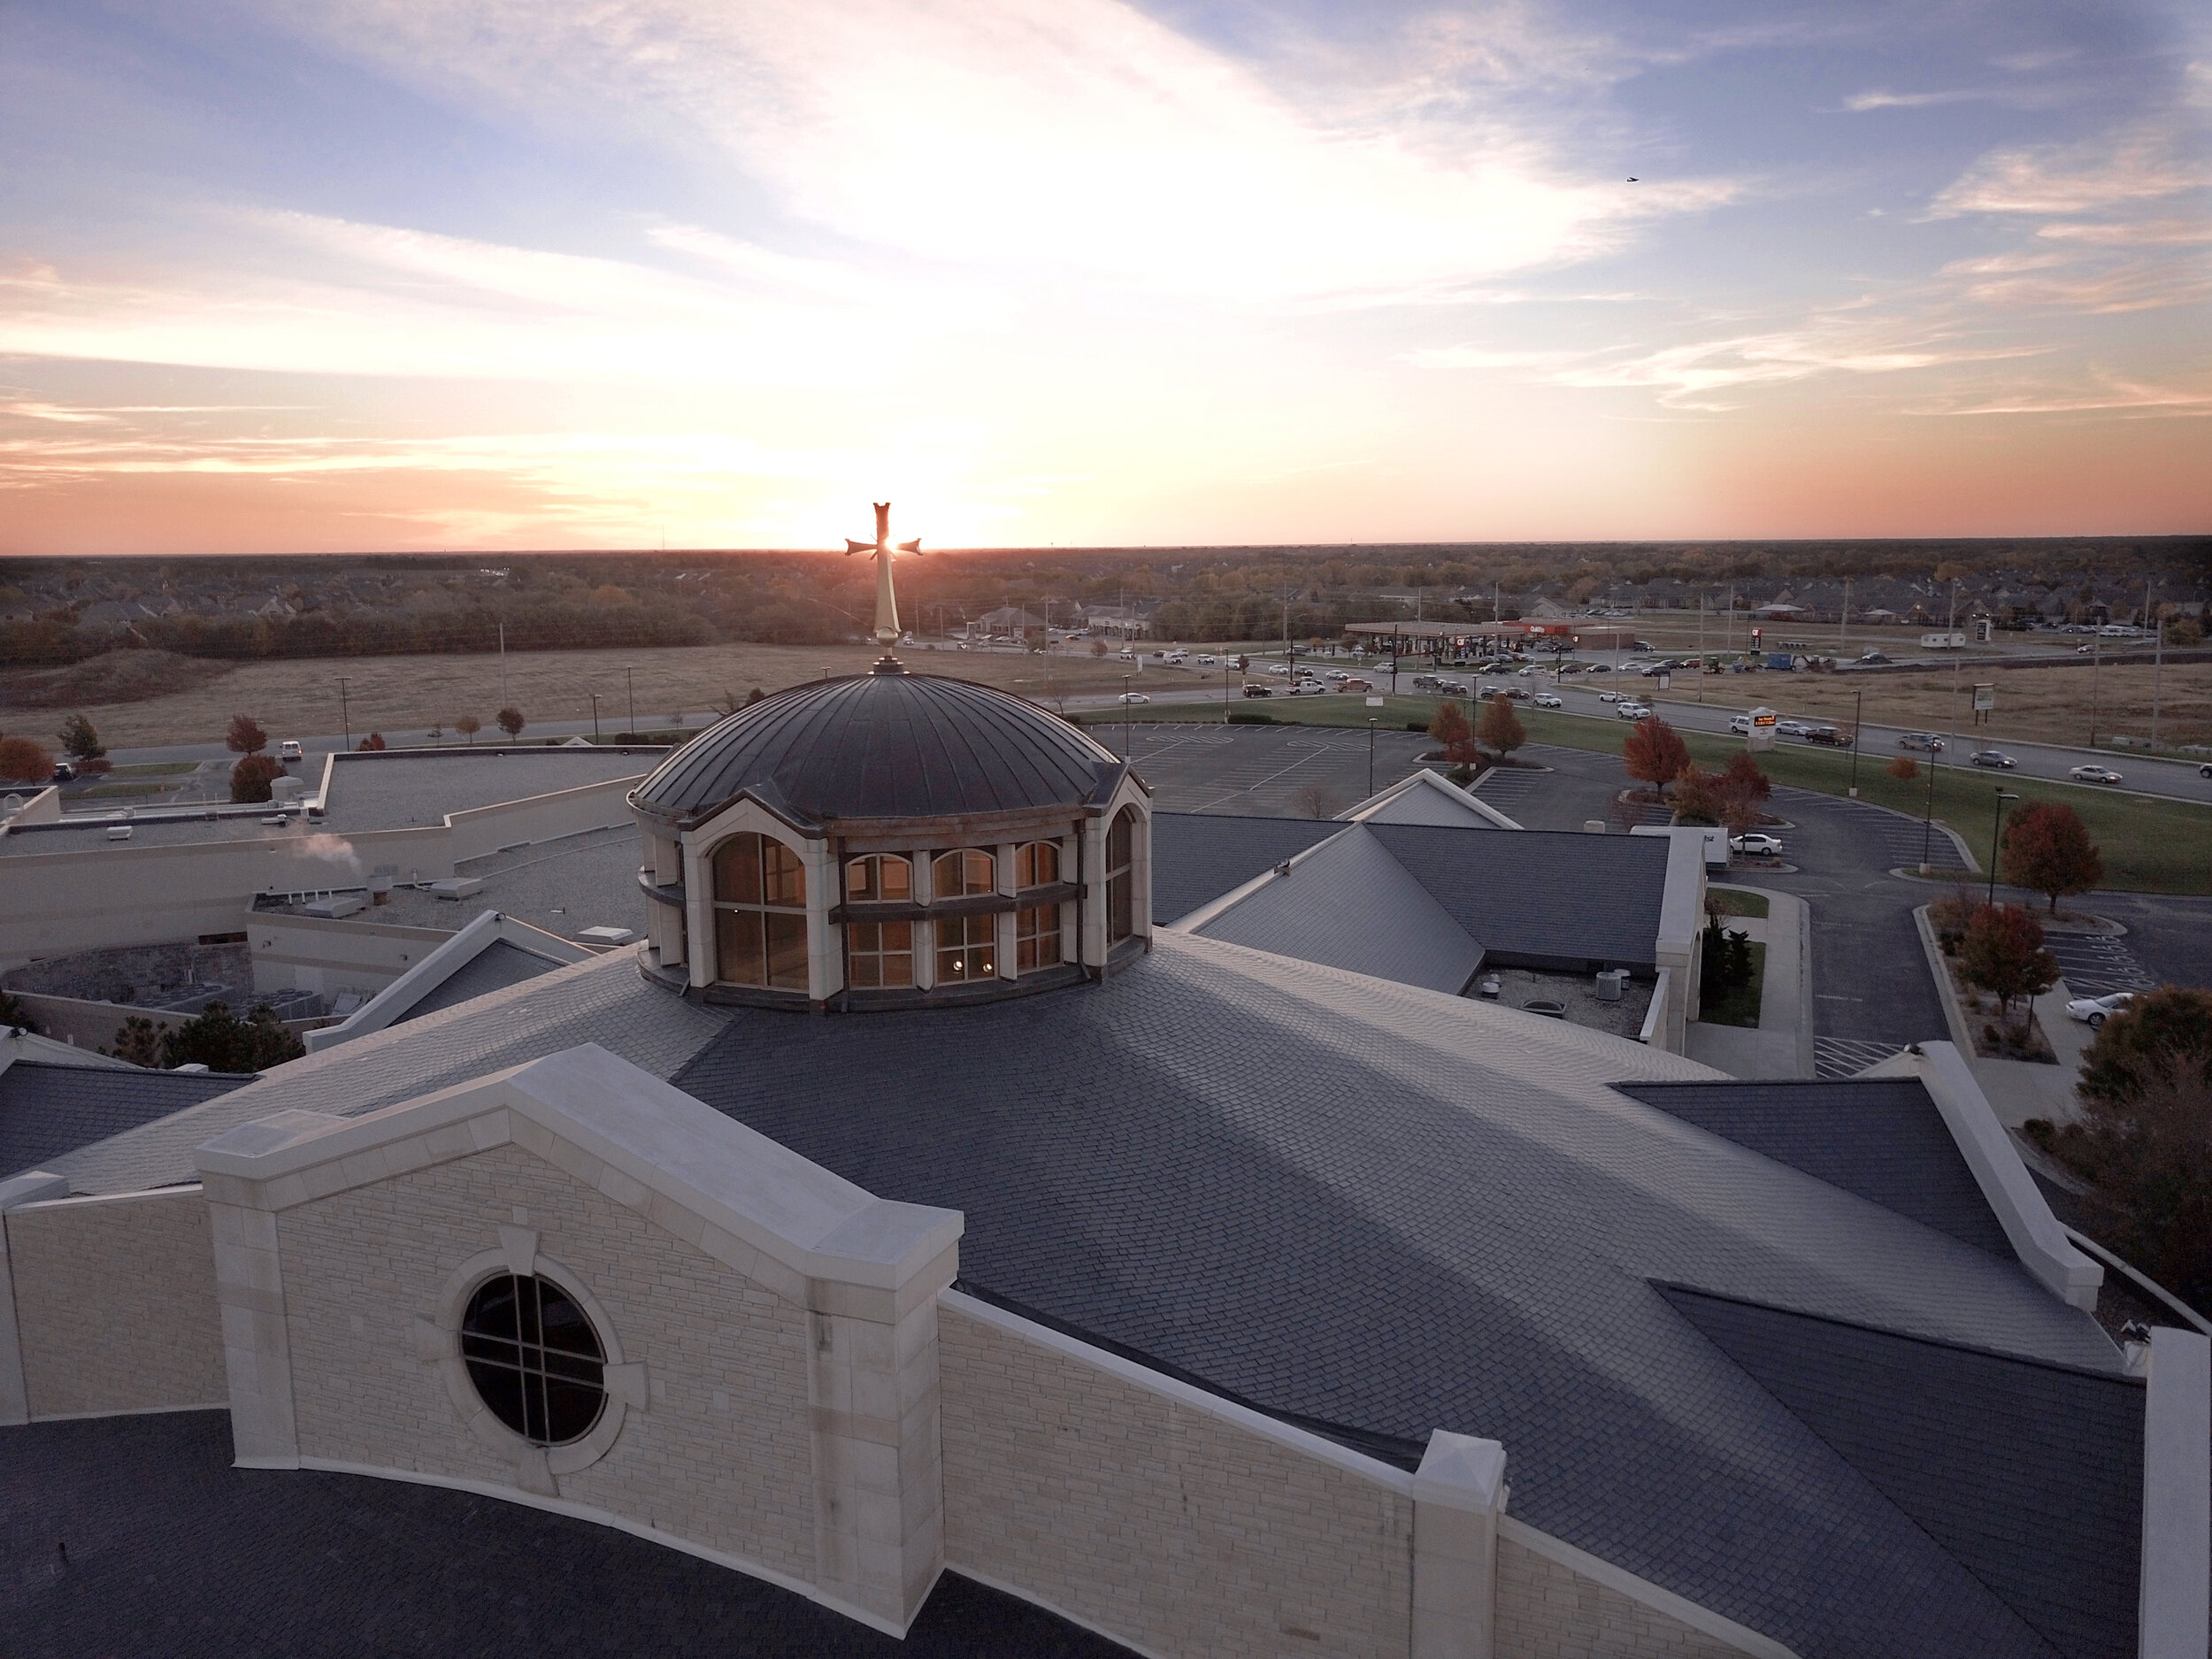 EatonRoofing+MagdalenChurch+CommercialRoofing.jpg